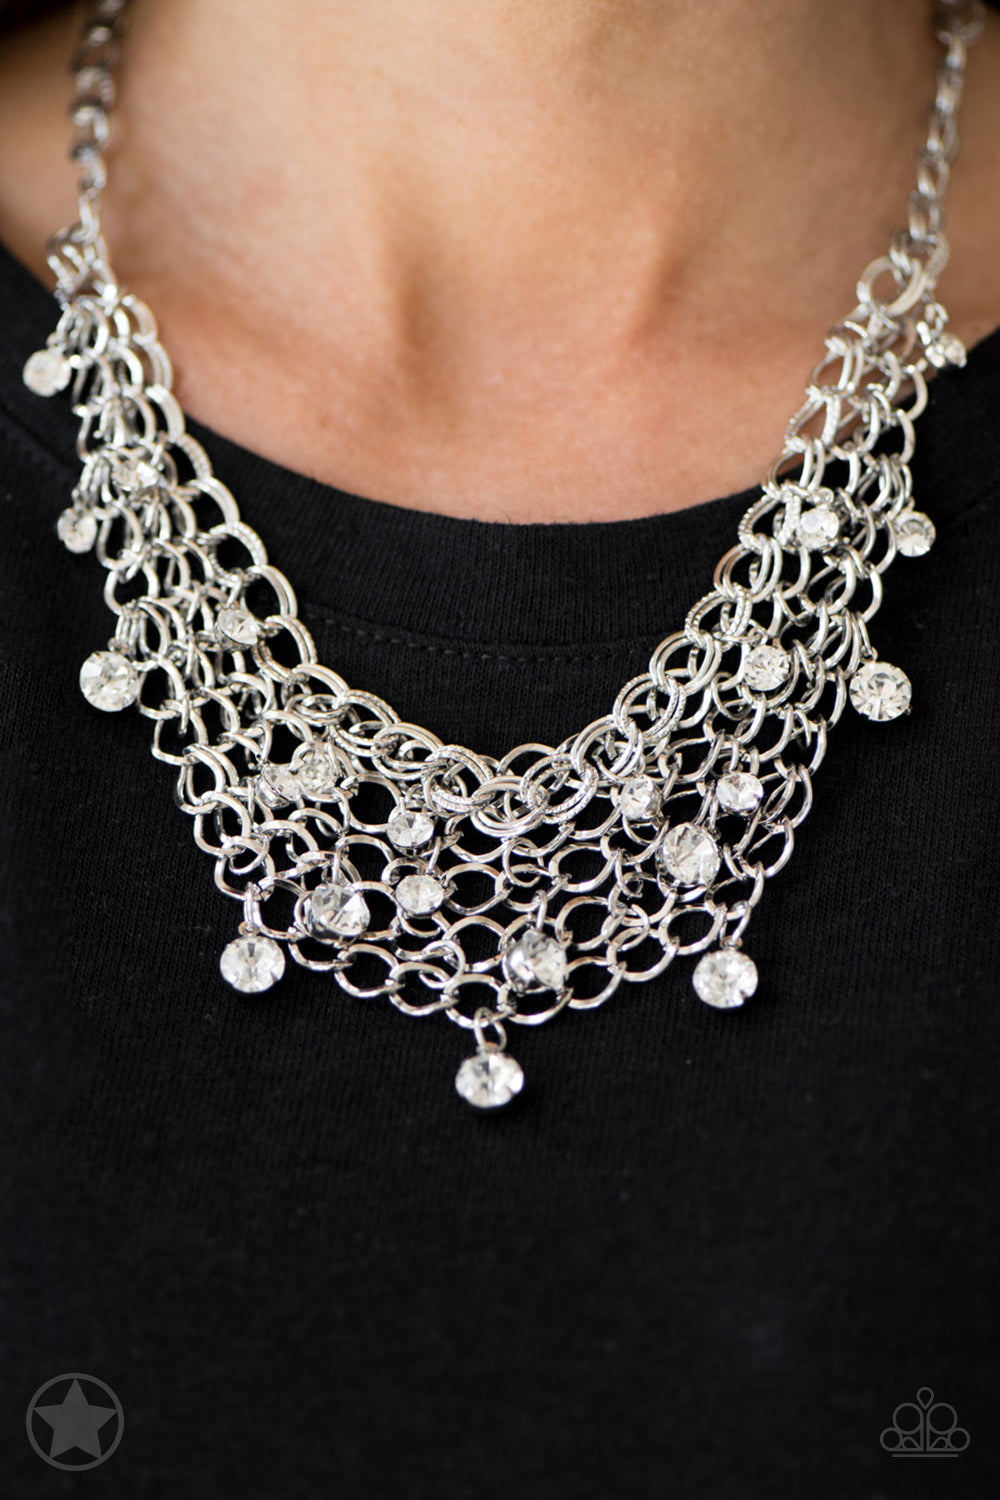 Fishing for Compliments - Silver Blockbuster Necklace 1184N